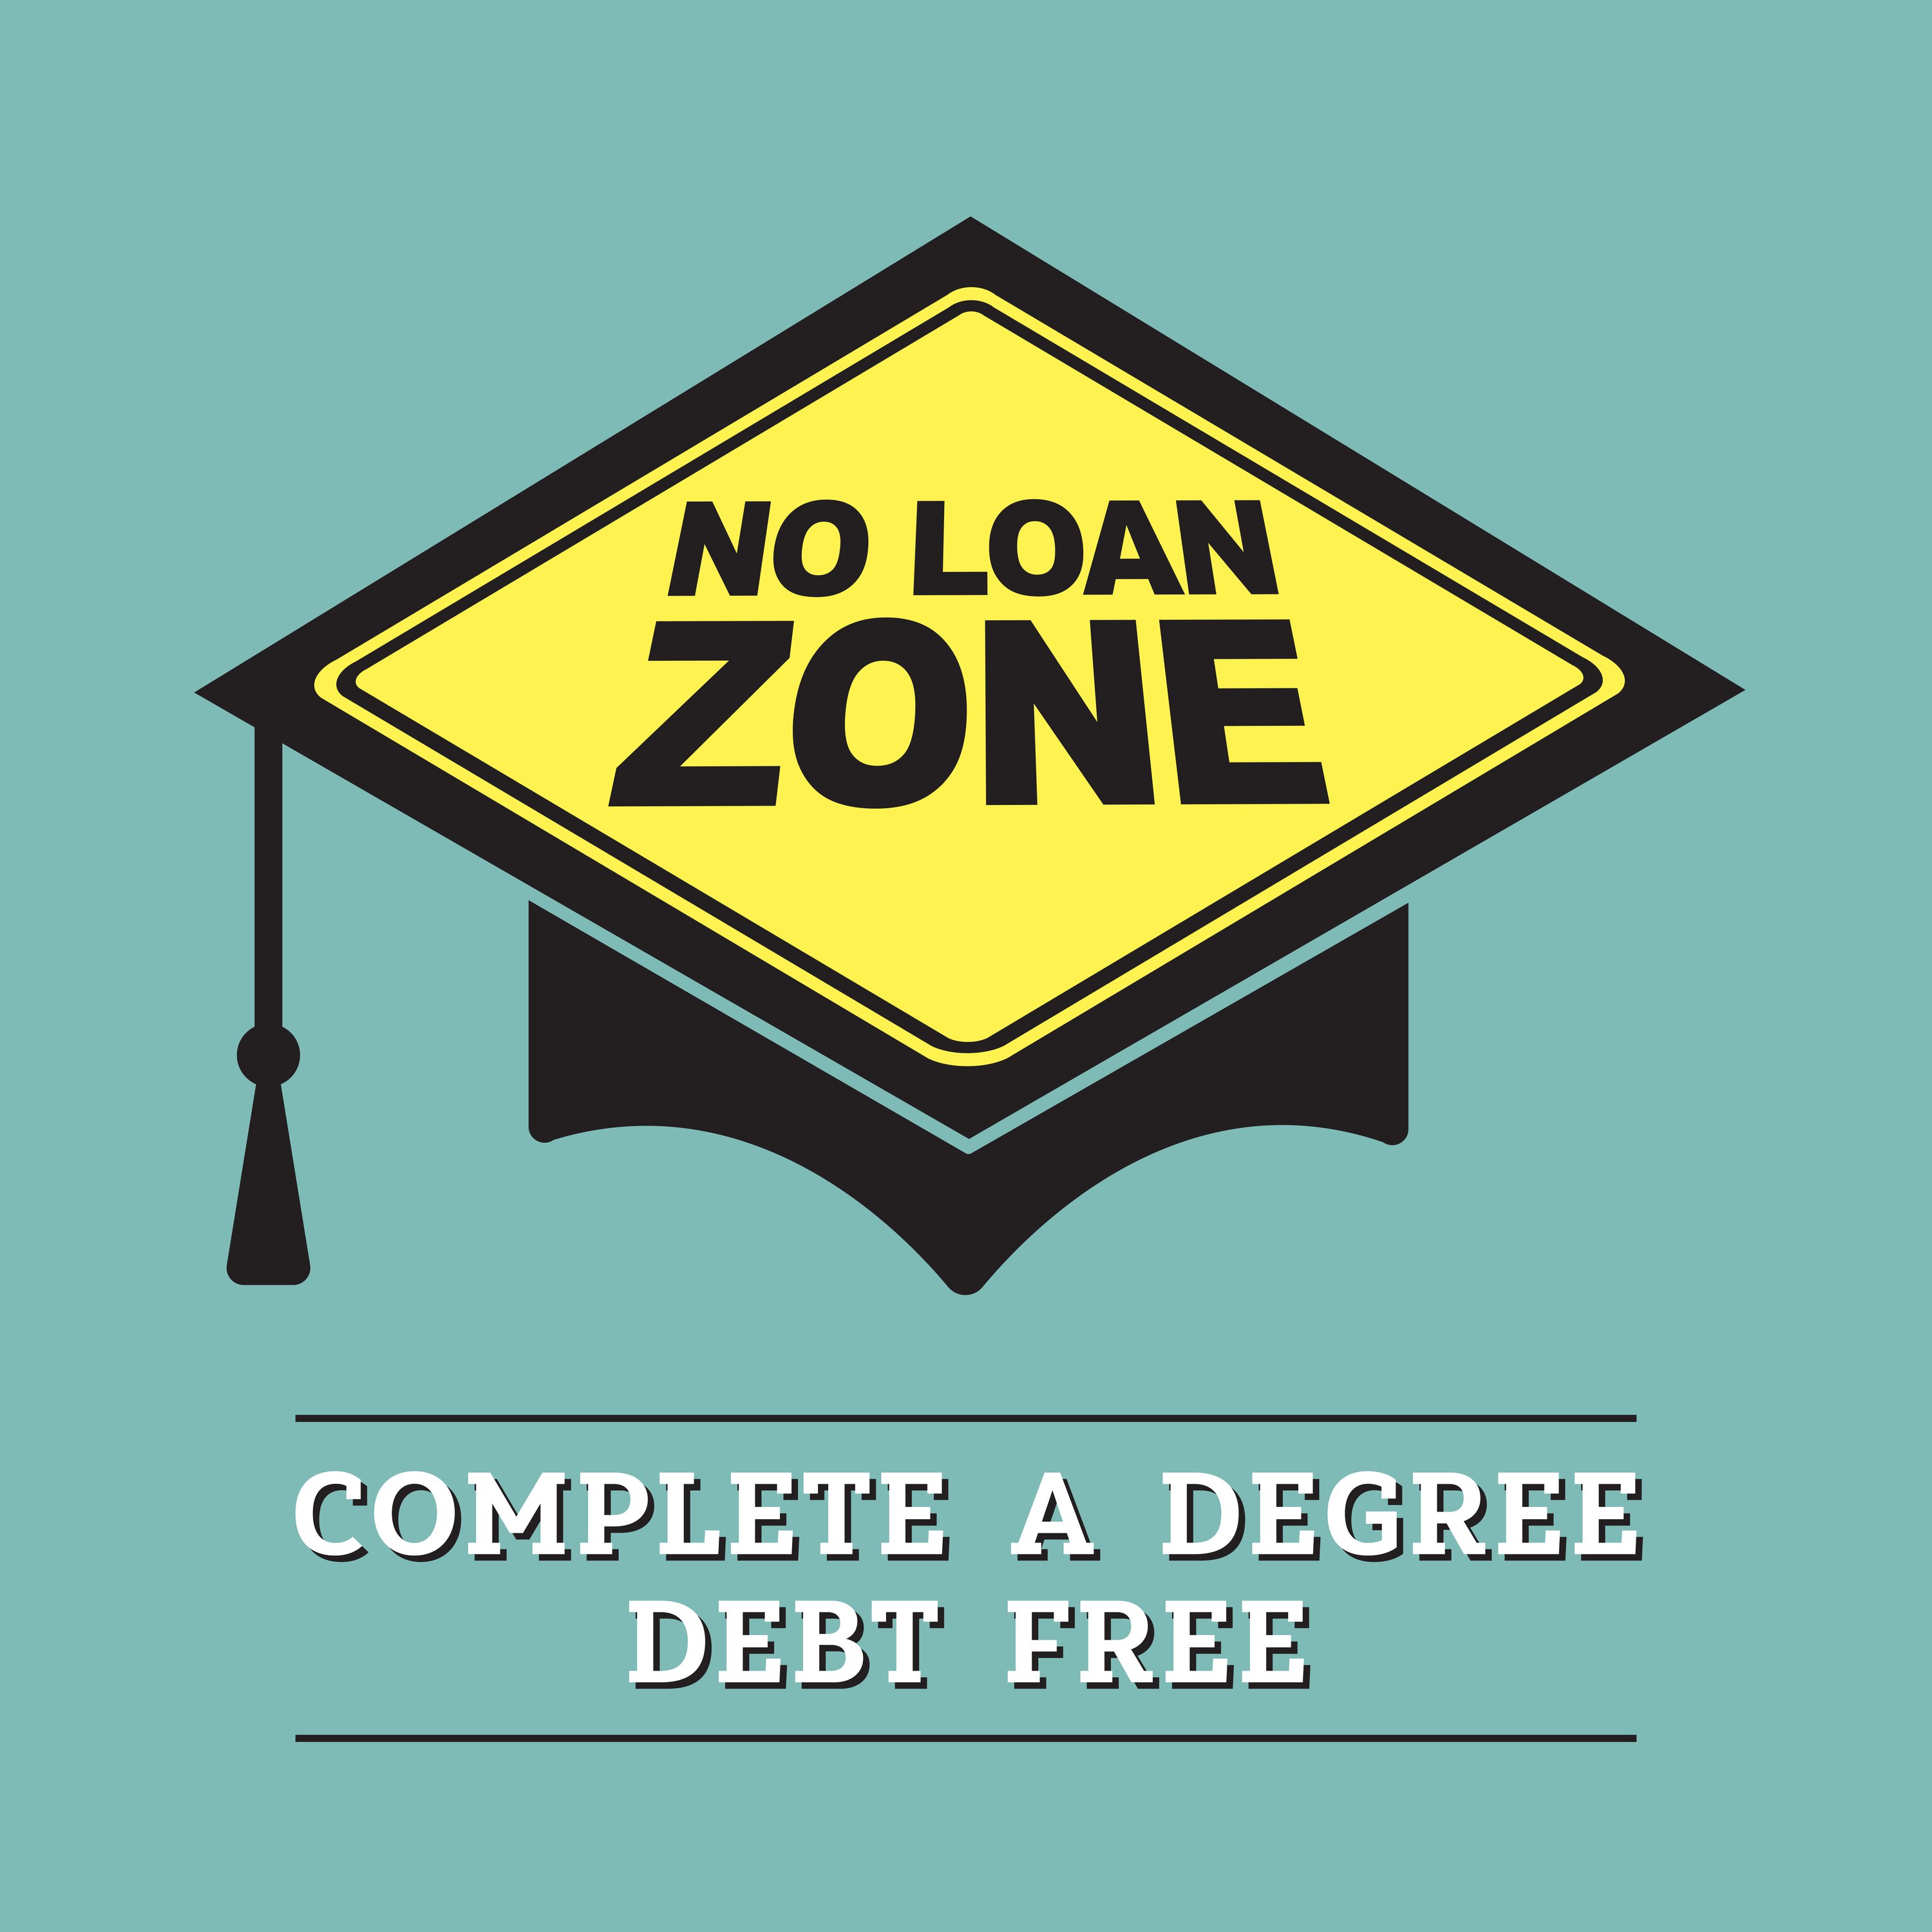 EP5: Join the No Loan Zone Challenge